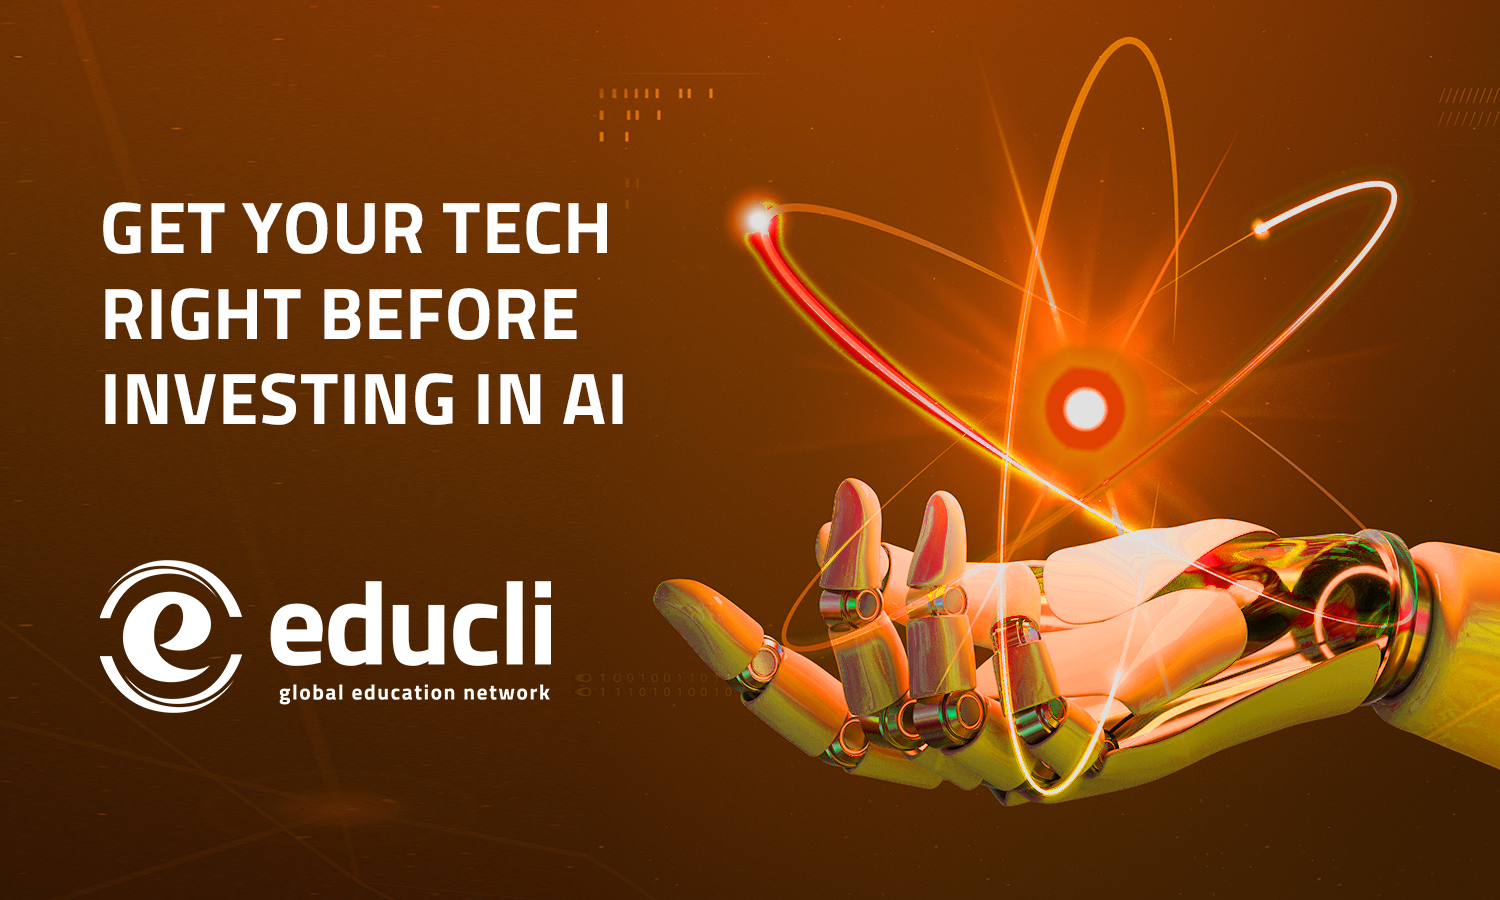 GET YOUR TECH RIGHT BEFORE INVESTING IN AI